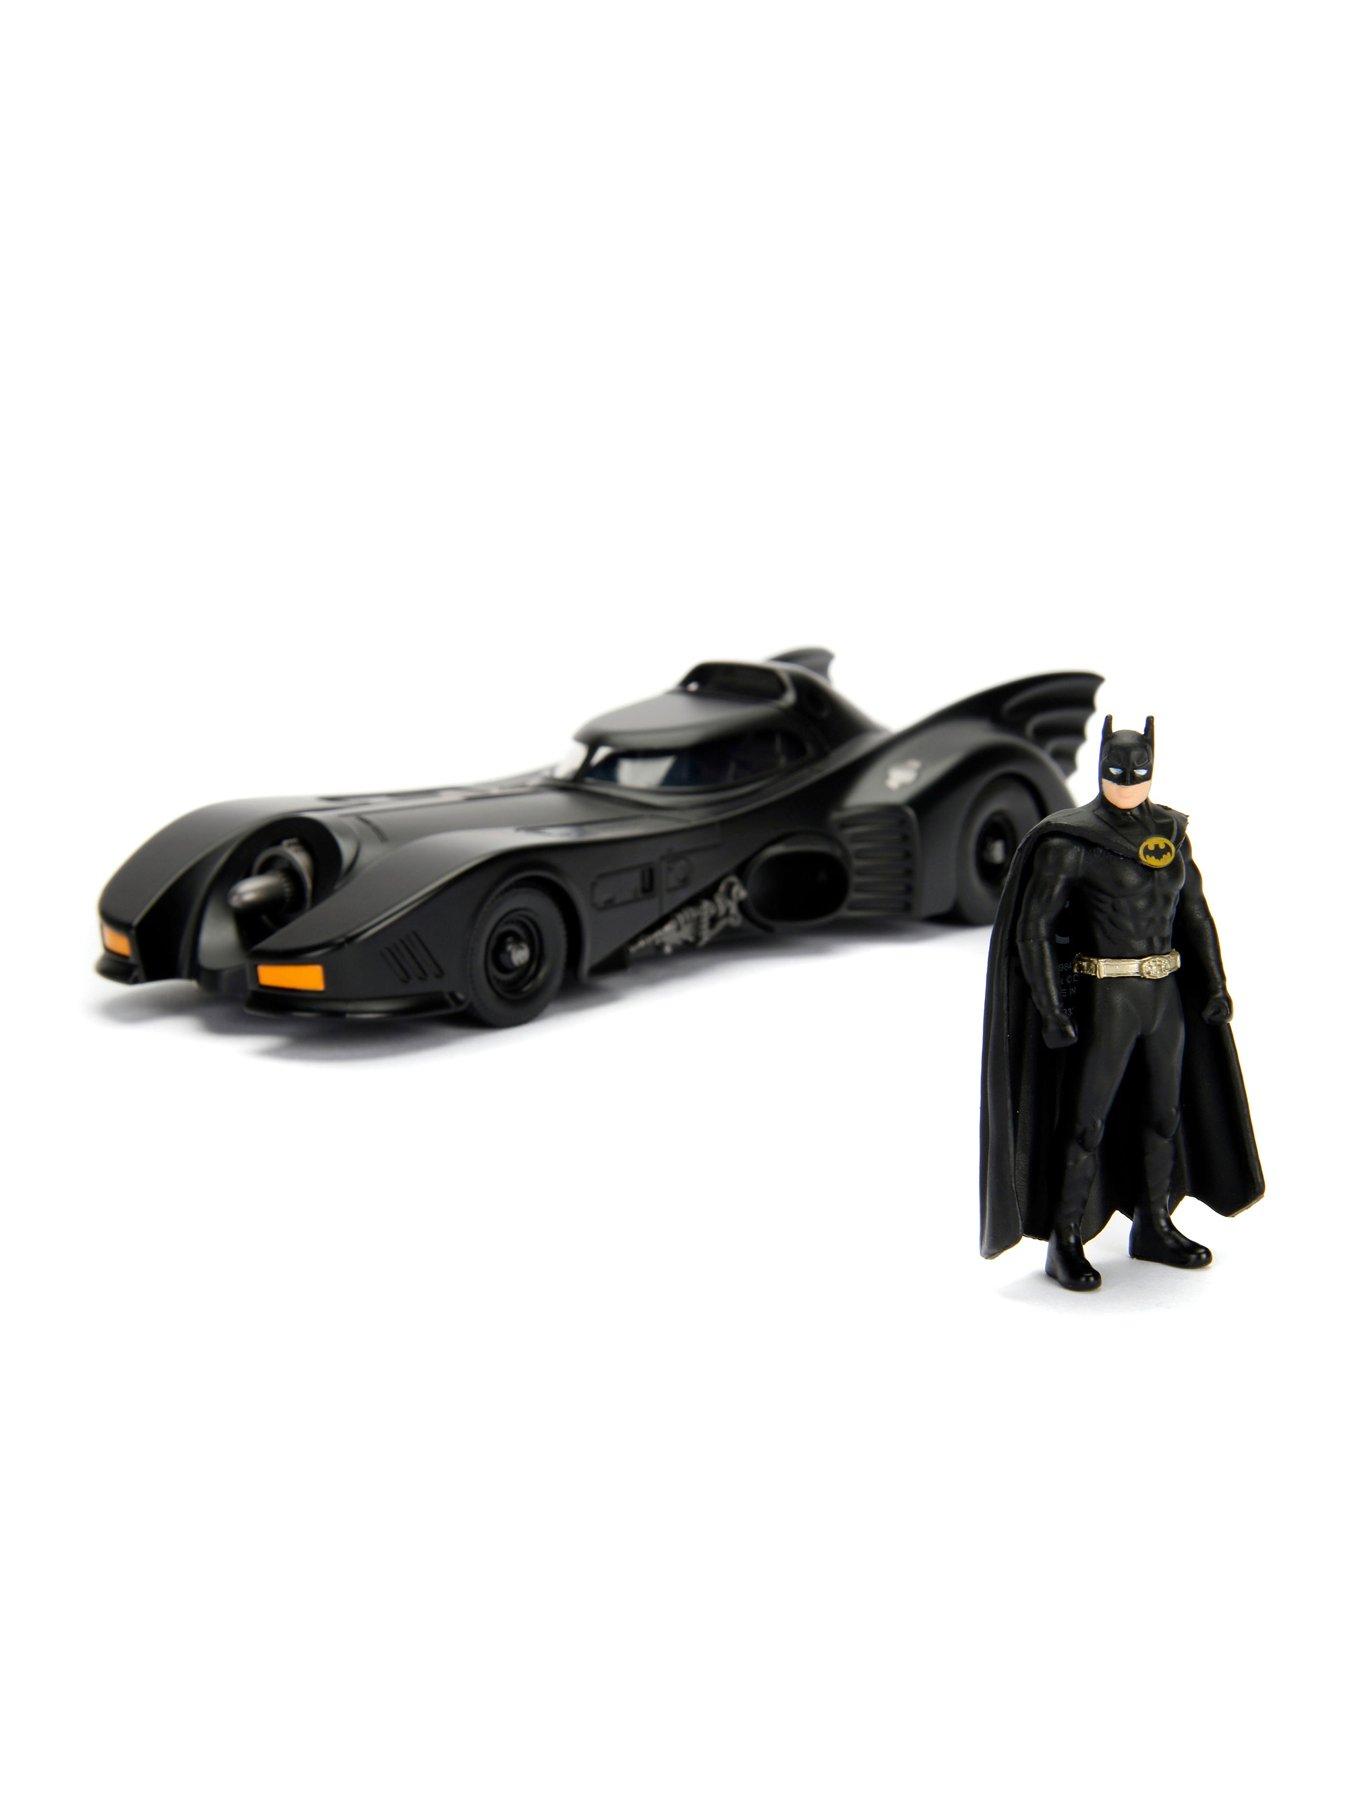 1989 Batmobile From First Two “Batman” Movie up for Sale - The Car